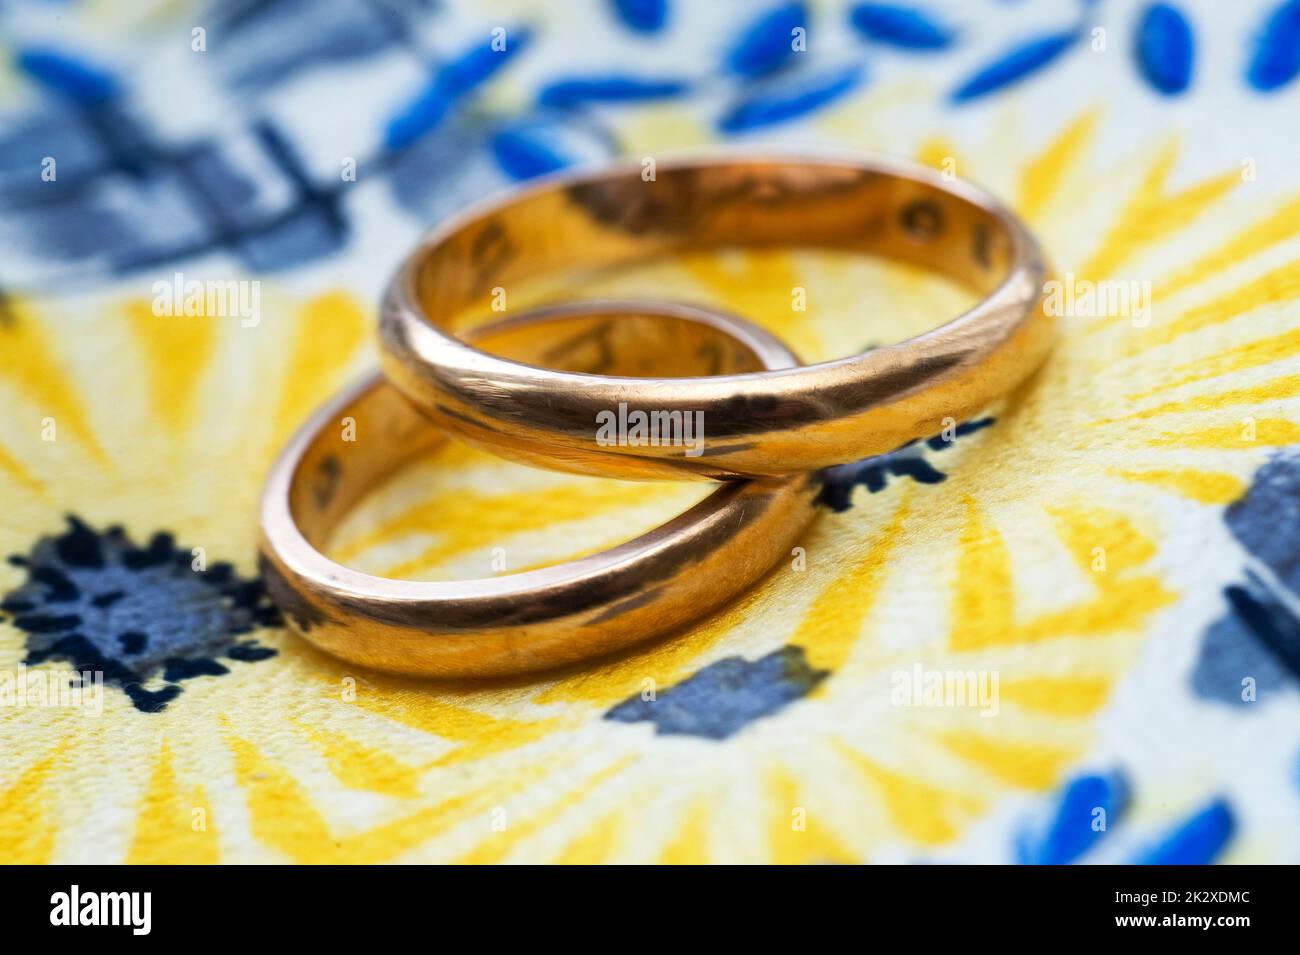 two gold wedding rings on a colored background Stock Photo